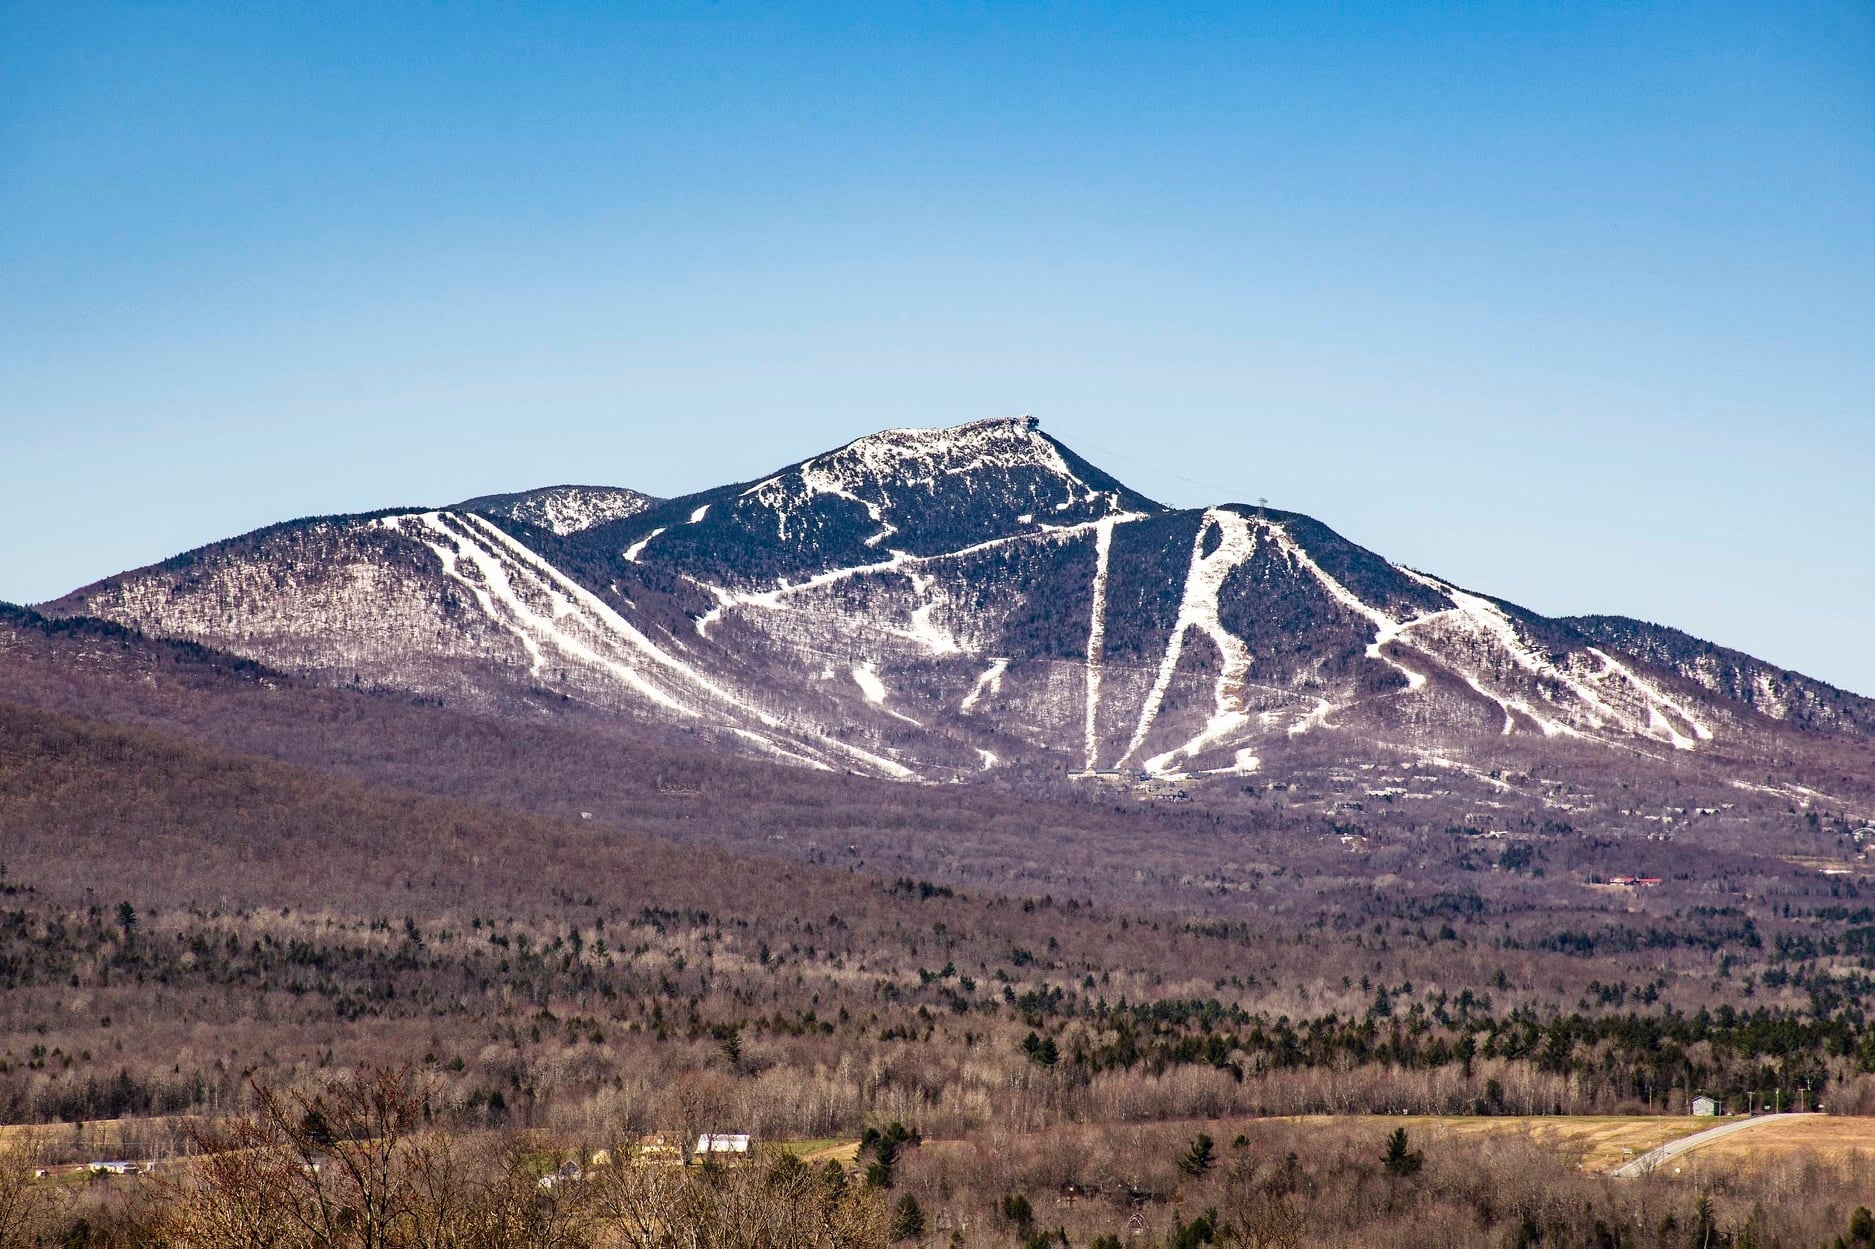 photo of jay peak mountain in early winter, surrounded by brown and green trees. The trails for skiing and snowboarding are covered in white snow and there's a clear blue sky.